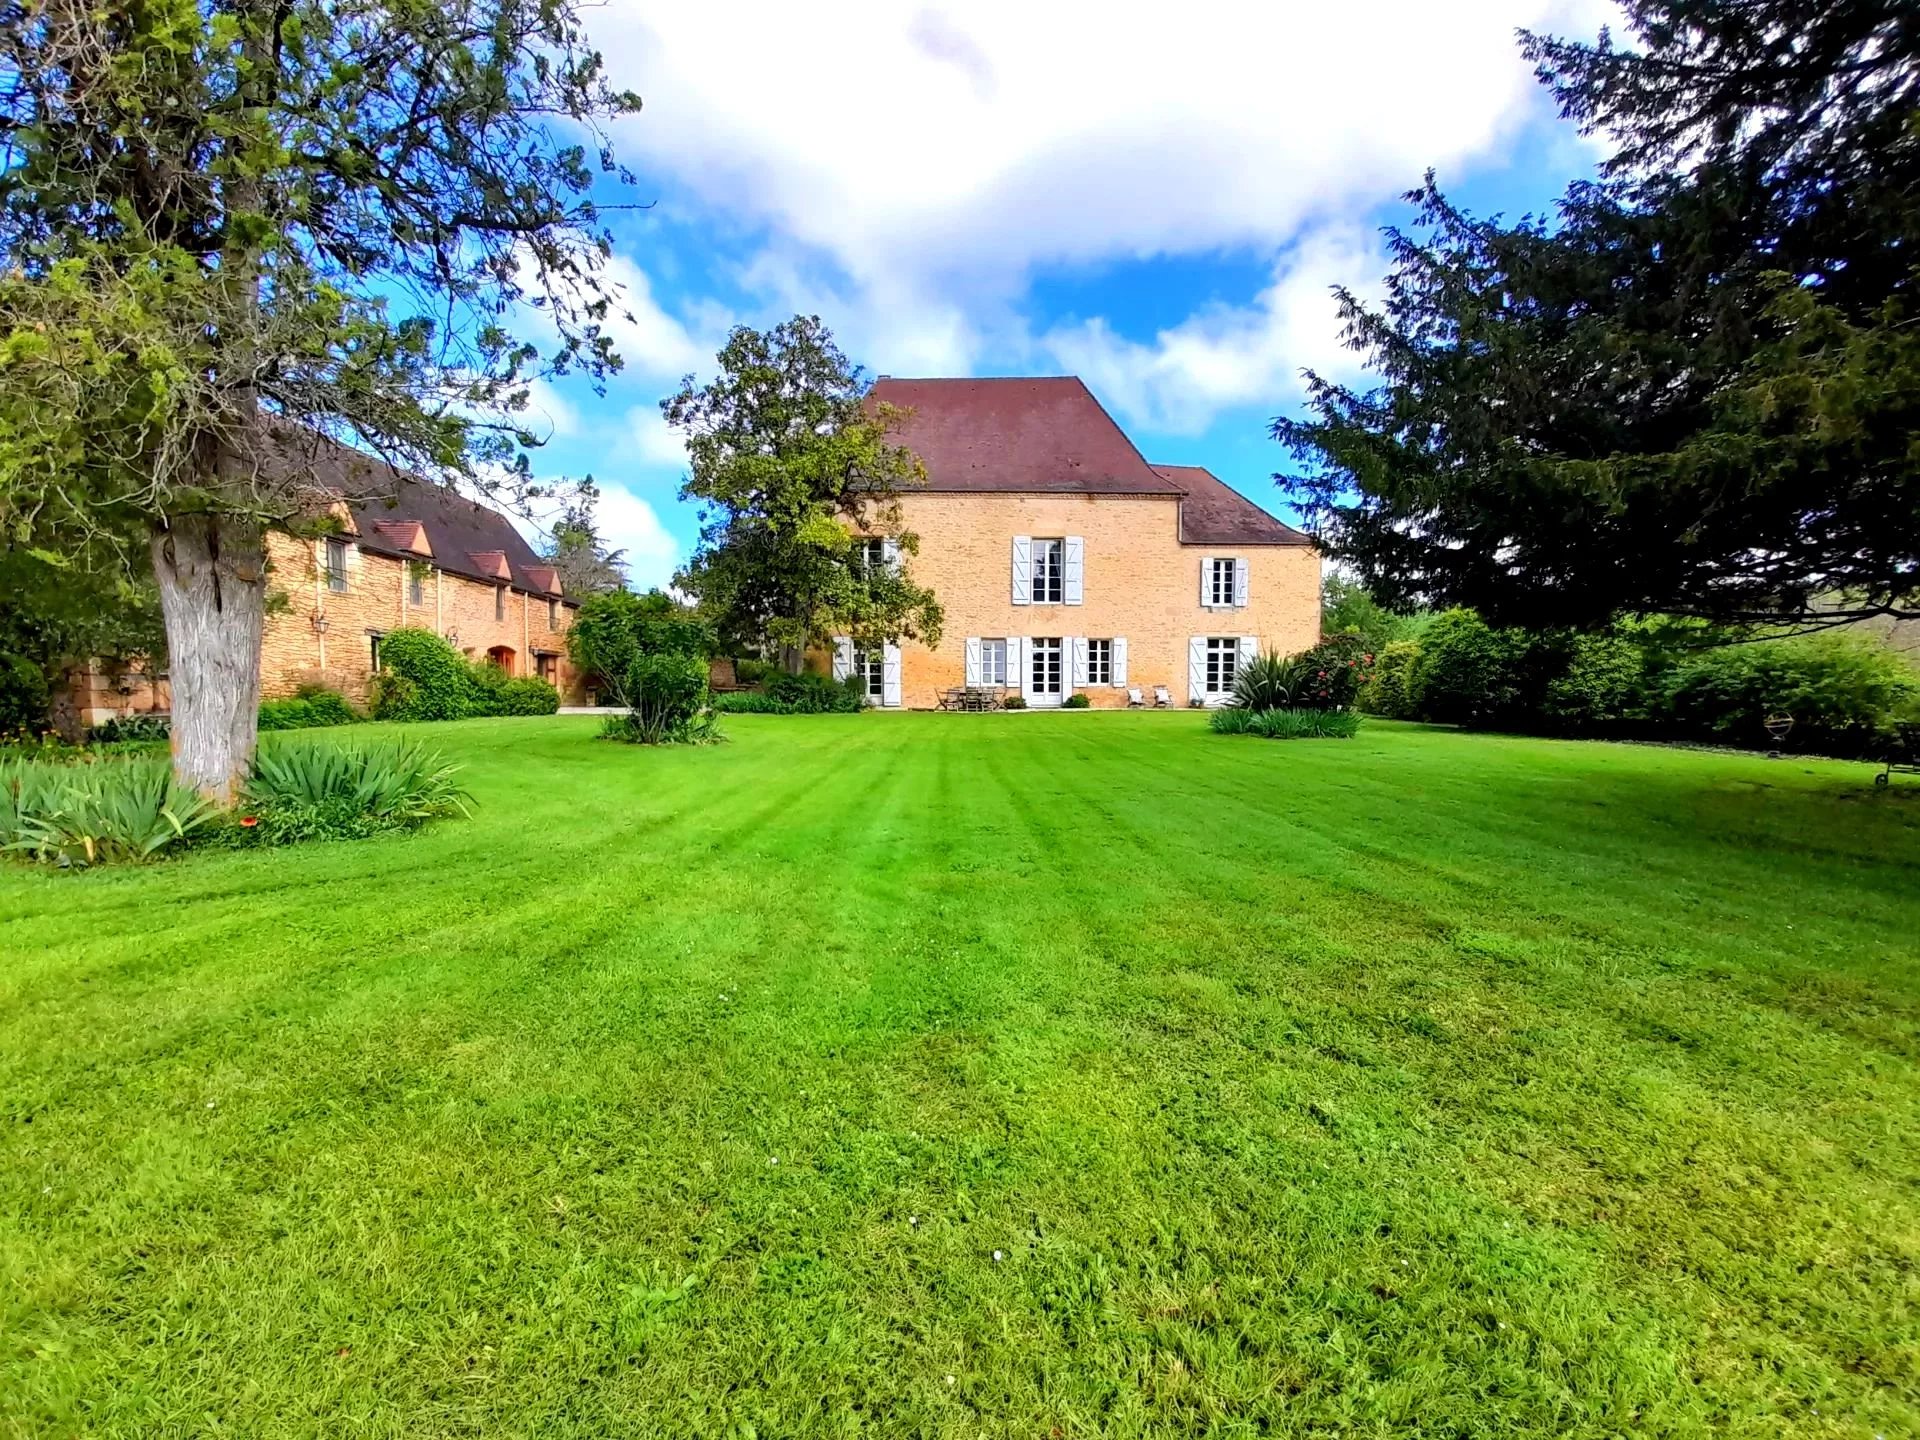 Magnificent 15th Century Manor house with 2nd house and 2 bed apartment